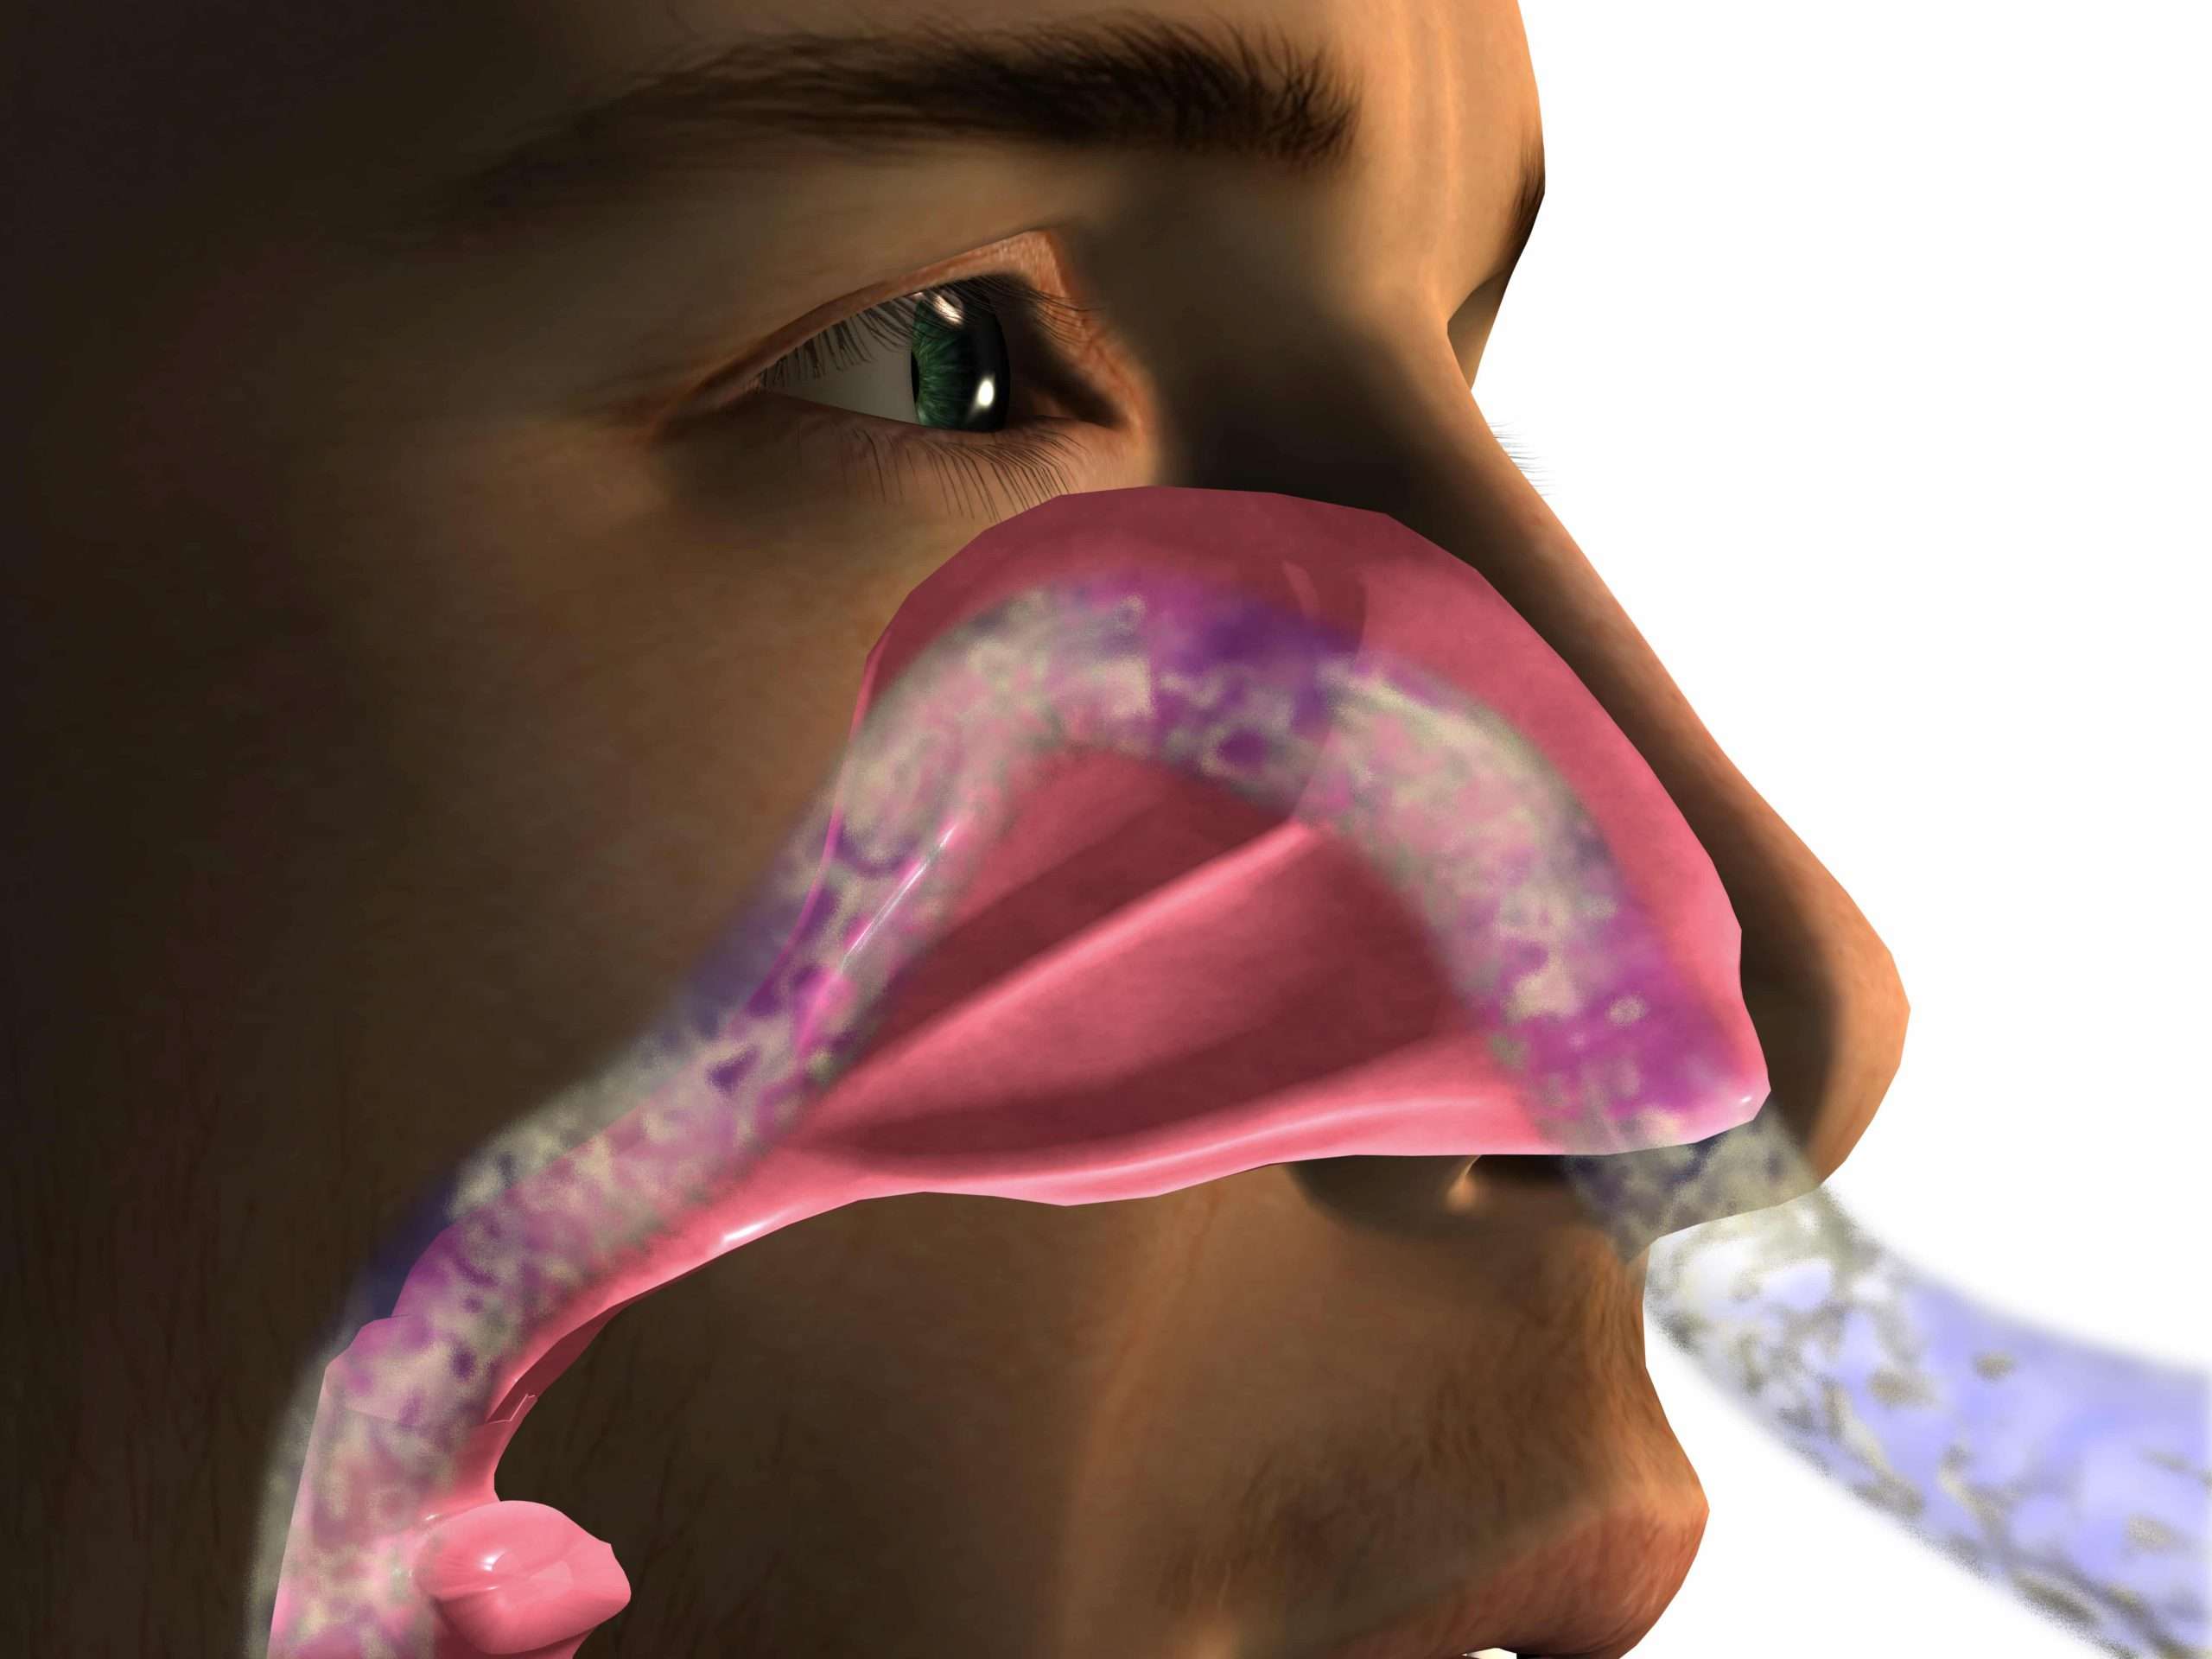 Reasons You May Have a Bad Smell in the Nose